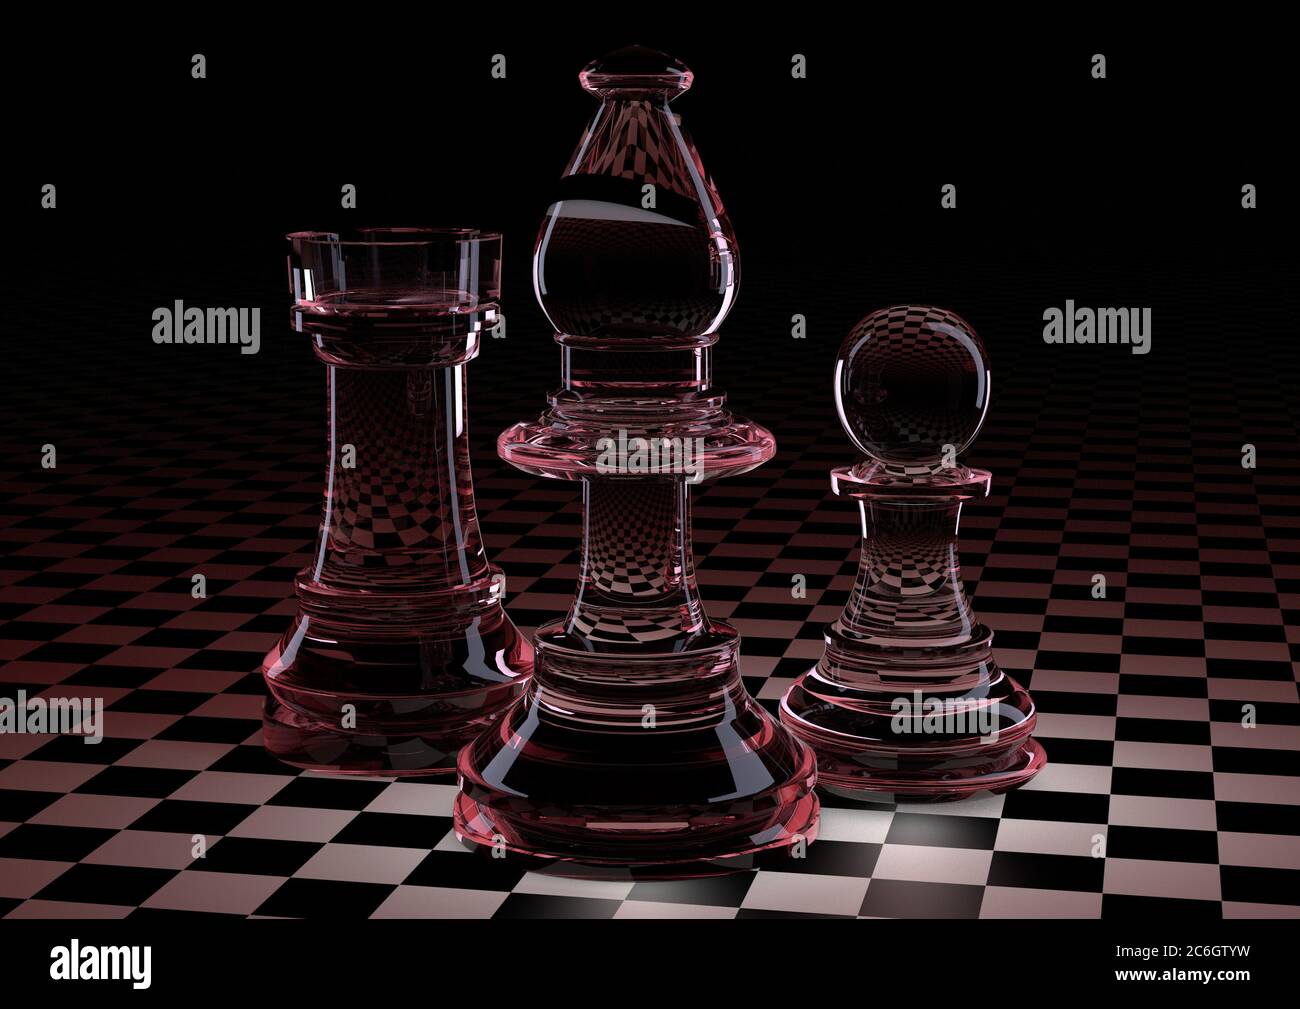 3D illustration. Chess pieces pawn, Rook, elephant of glass on the Board in a small cage. With red, Burgundy backlight. On a black background. The concept of board games, logic, training for the brain. Stock Photo